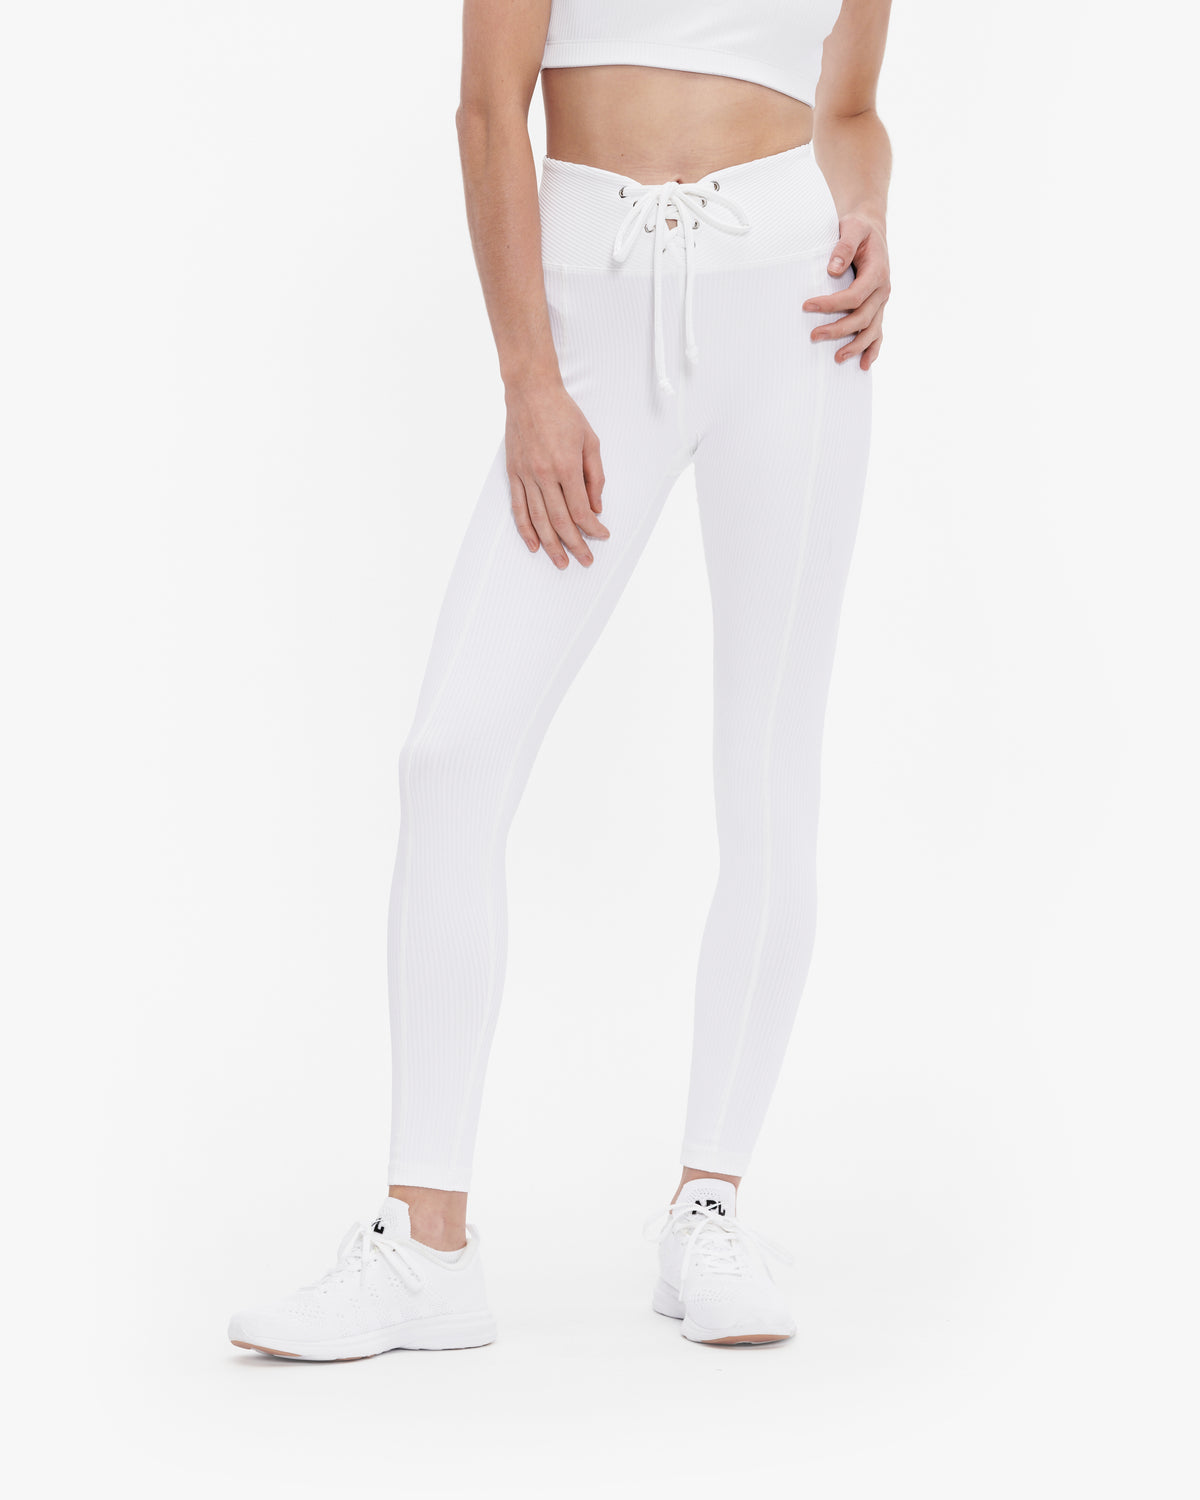 Year Of Ours Ribbed Football Legging – The Shop at Equinox